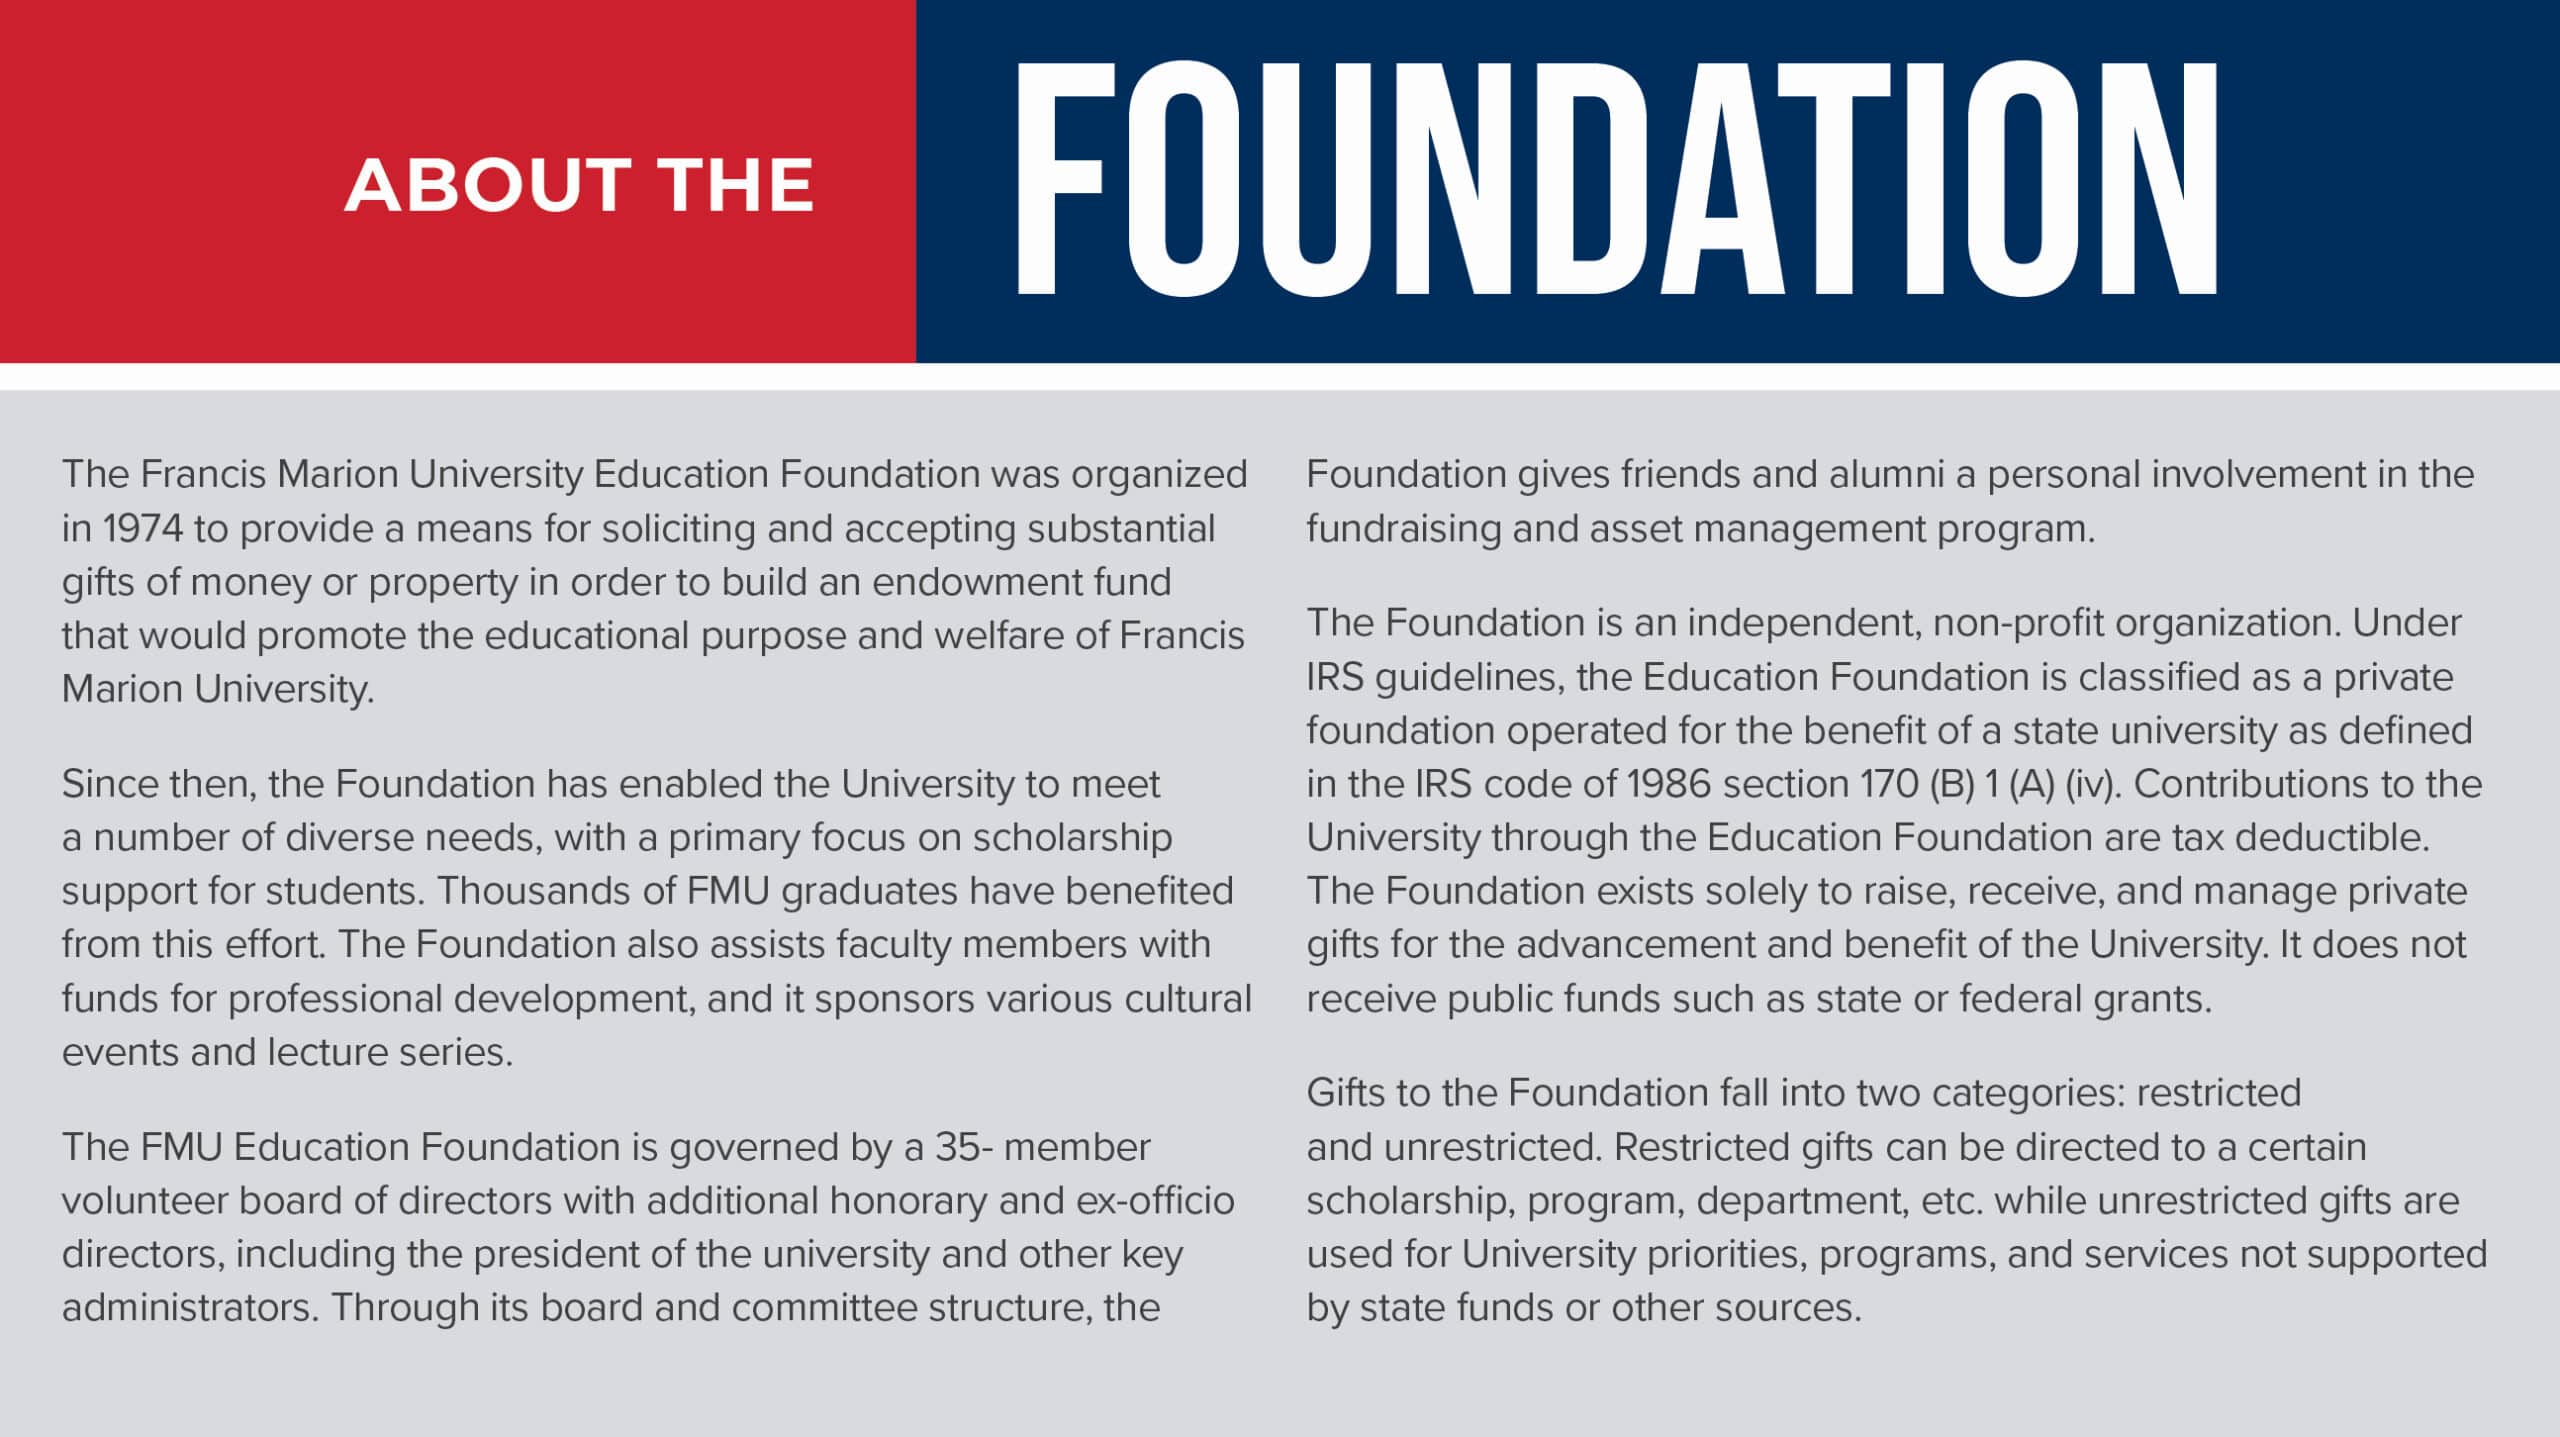 About the Foundation